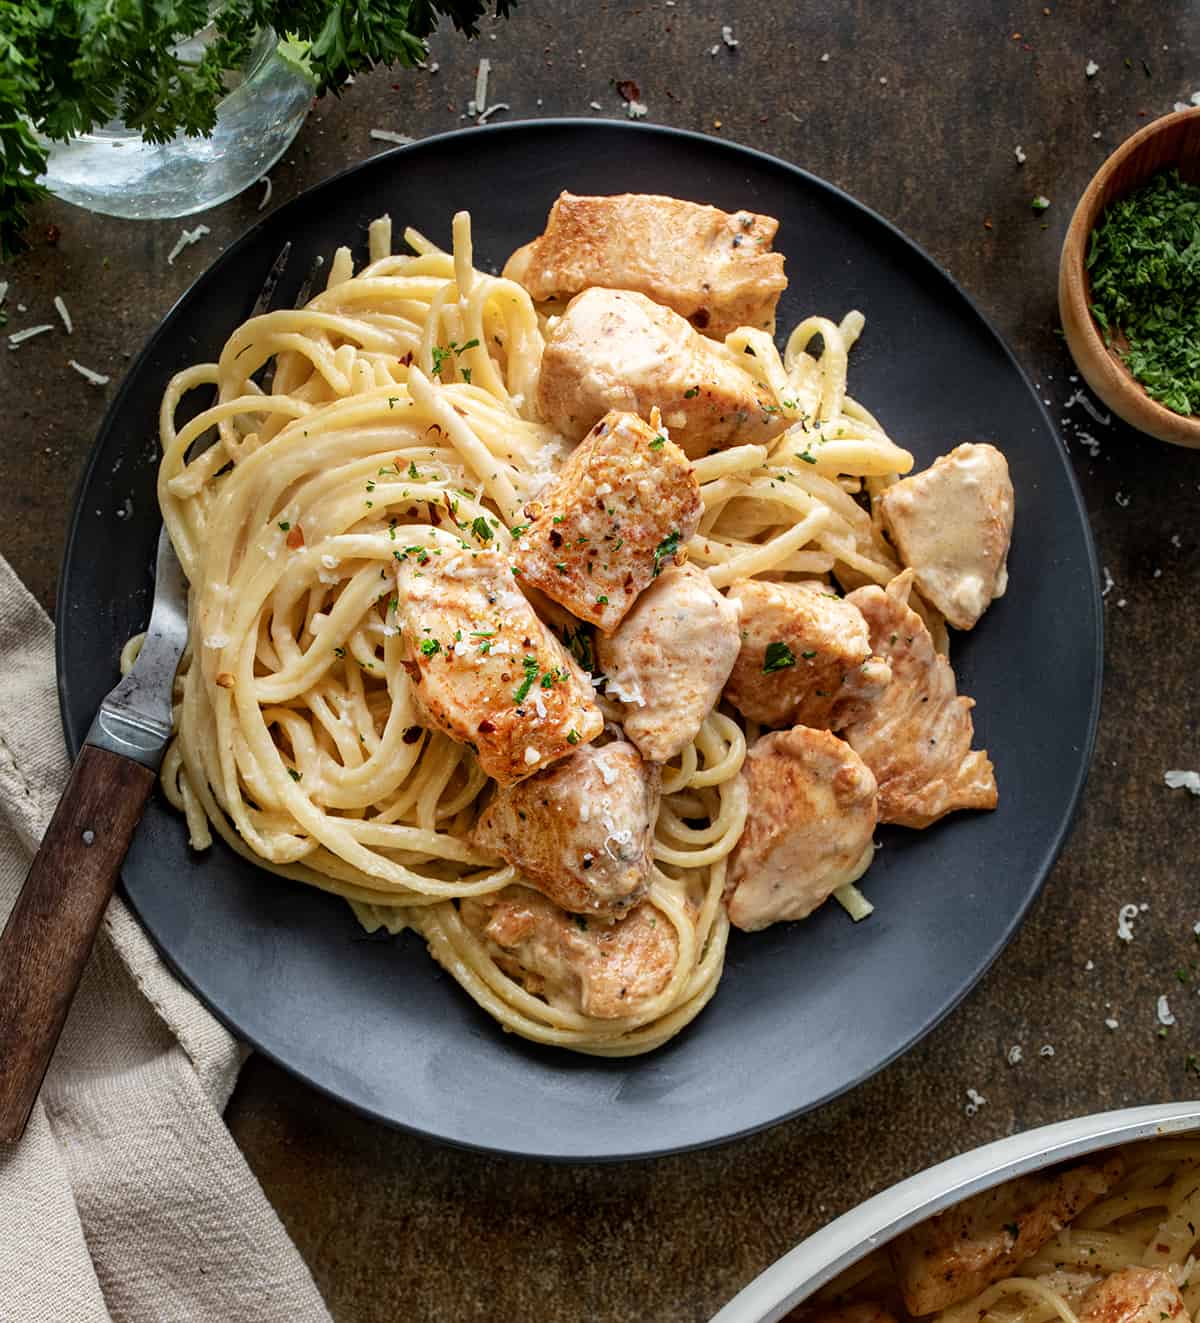 Plate of Creamy Chicken Pasta on a Table with Form and Garnish.